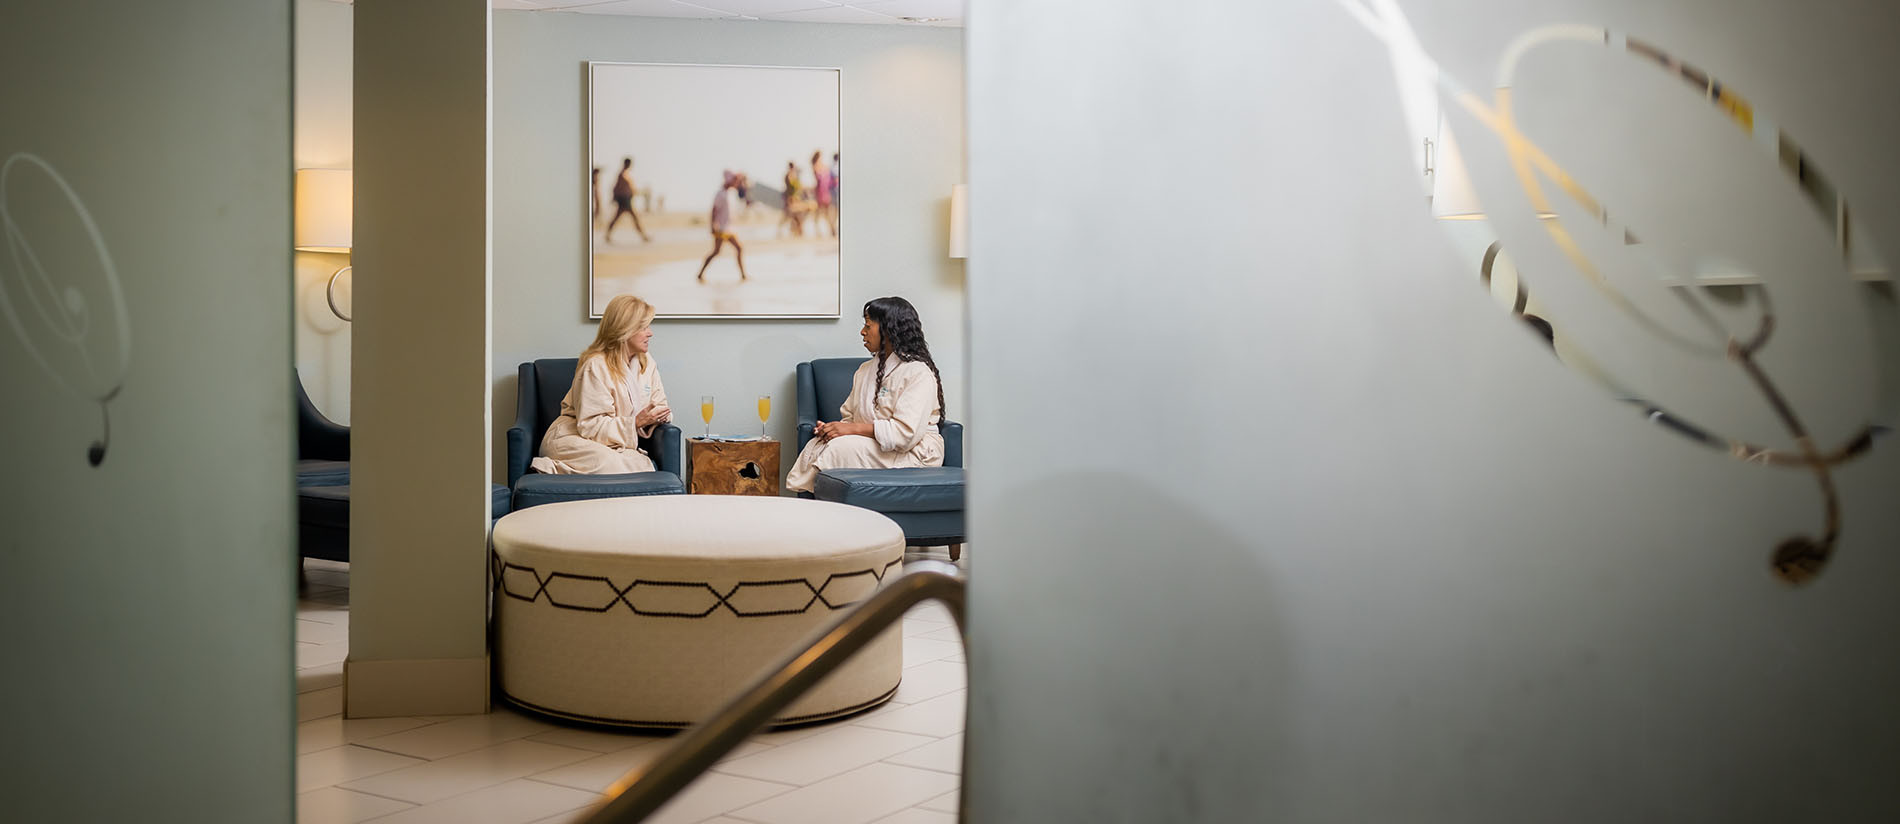 Two women sitting in the spa lounge at Serenity by the sea Spa in Destin, Florida.